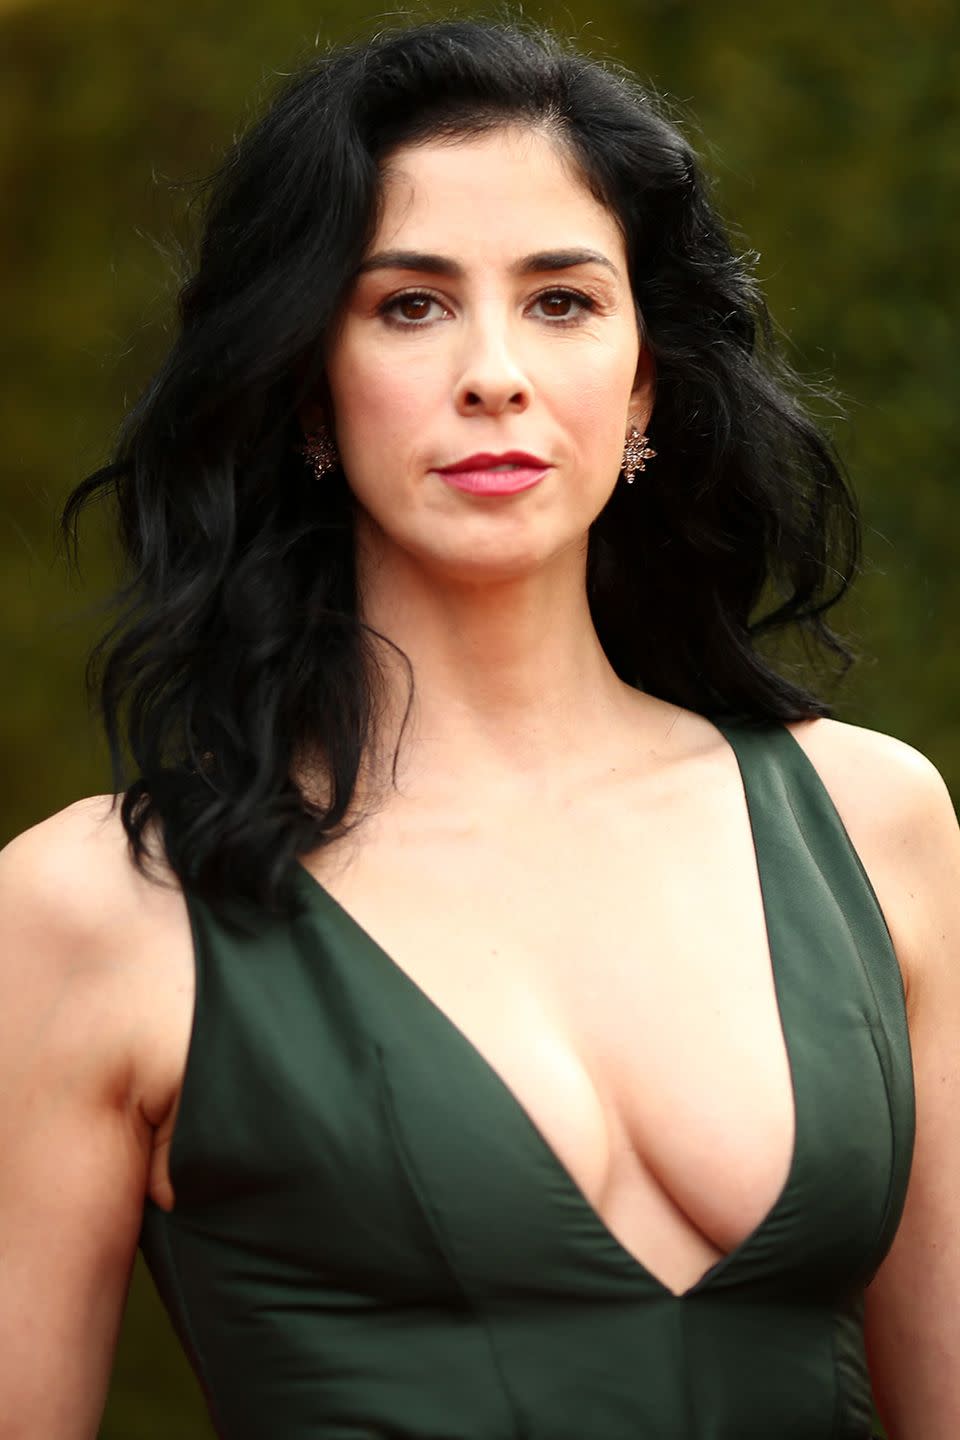 <p>The comedian and actress expressed her dislike for alcohol in a <a href="http://www.dailymail.co.uk/tvshowbiz/article-2734355/Sarah-Silverman-reveals-liquid-vaporiser-dashing-barefoot-collect-Emmy-gushing-My-Mr-Fancypants-Sheen.html" rel="nofollow noopener" target="_blank" data-ylk="slk:red carpet interview" class="link ">red carpet interview</a> at the 2014 Emmys where she tells E!'s Giuliana Rancic, "I don't drink because it gives me a stomach ache," and further explaining "I try all the time, it looks good and I feel like I would have fun being drunk, but I have a Jewish stomach."</p>